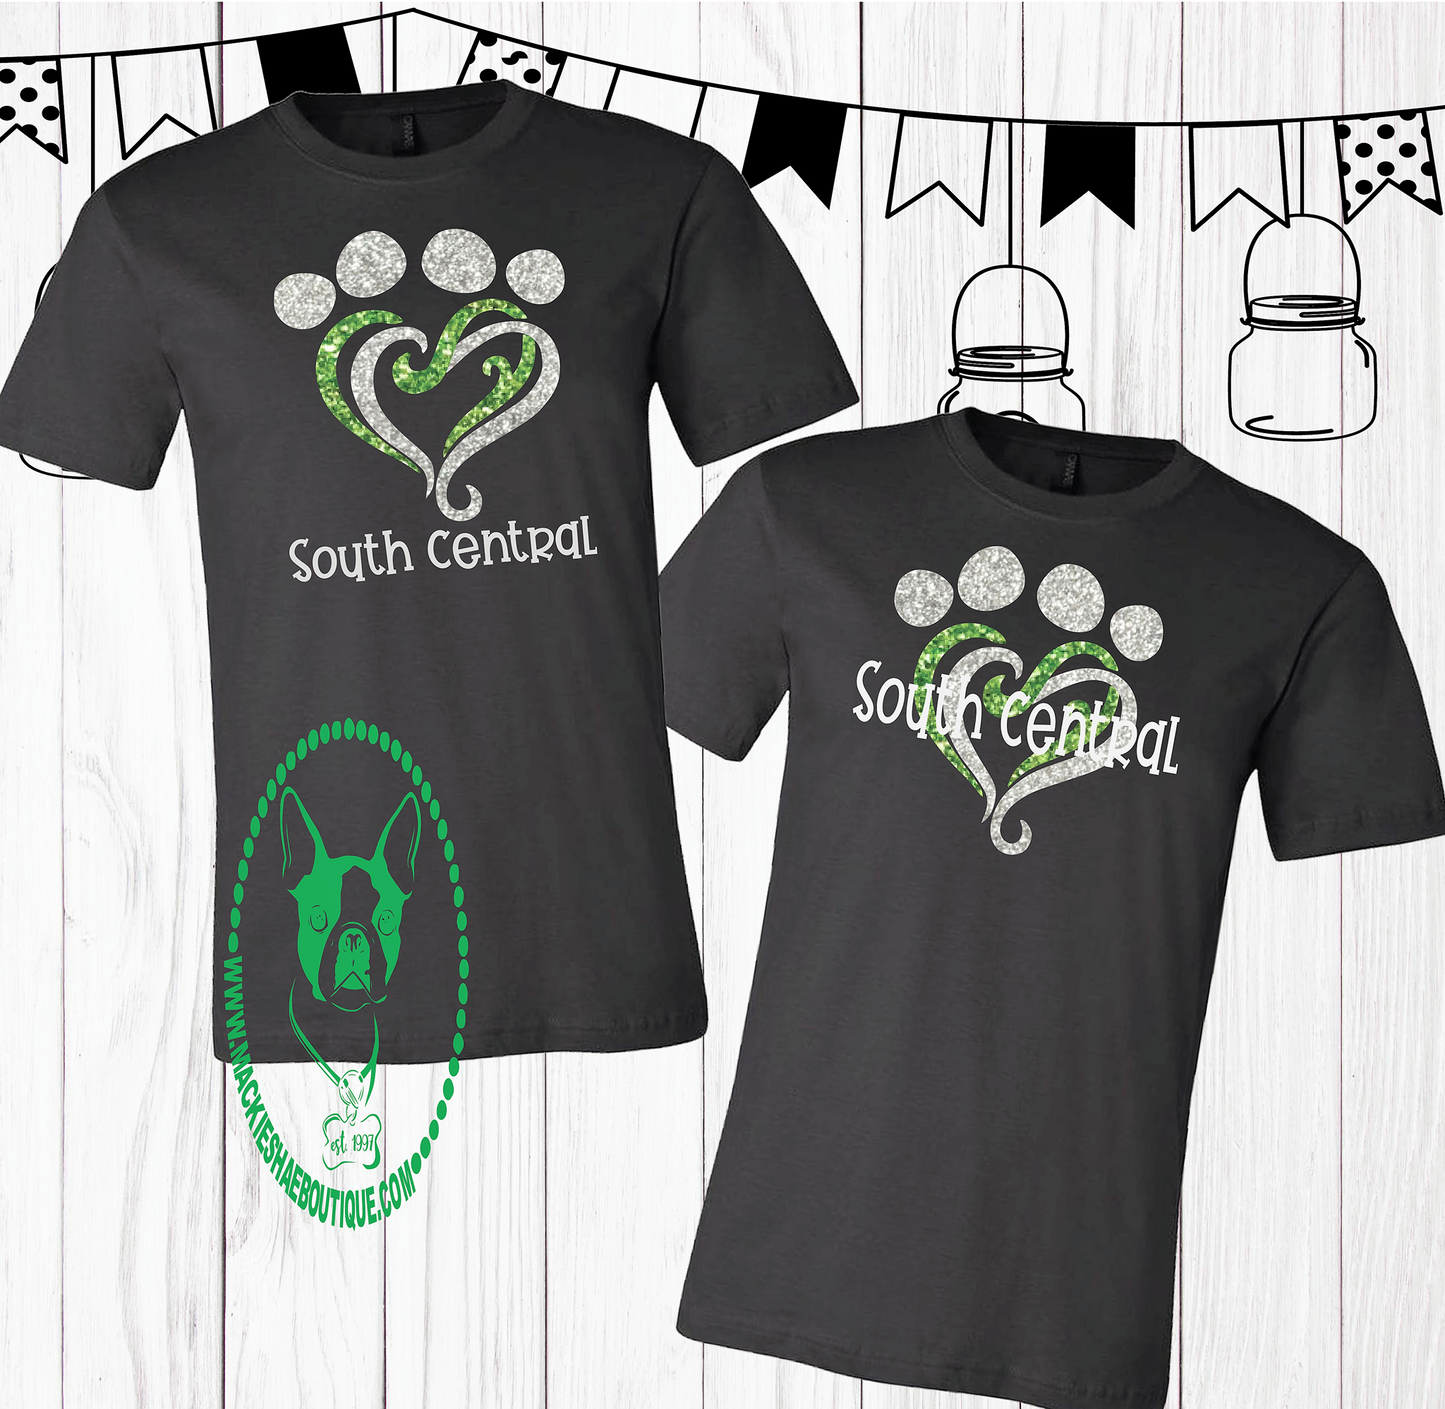 South Central Heart Paw Custom Shirt (4 different options), Short Sleeve